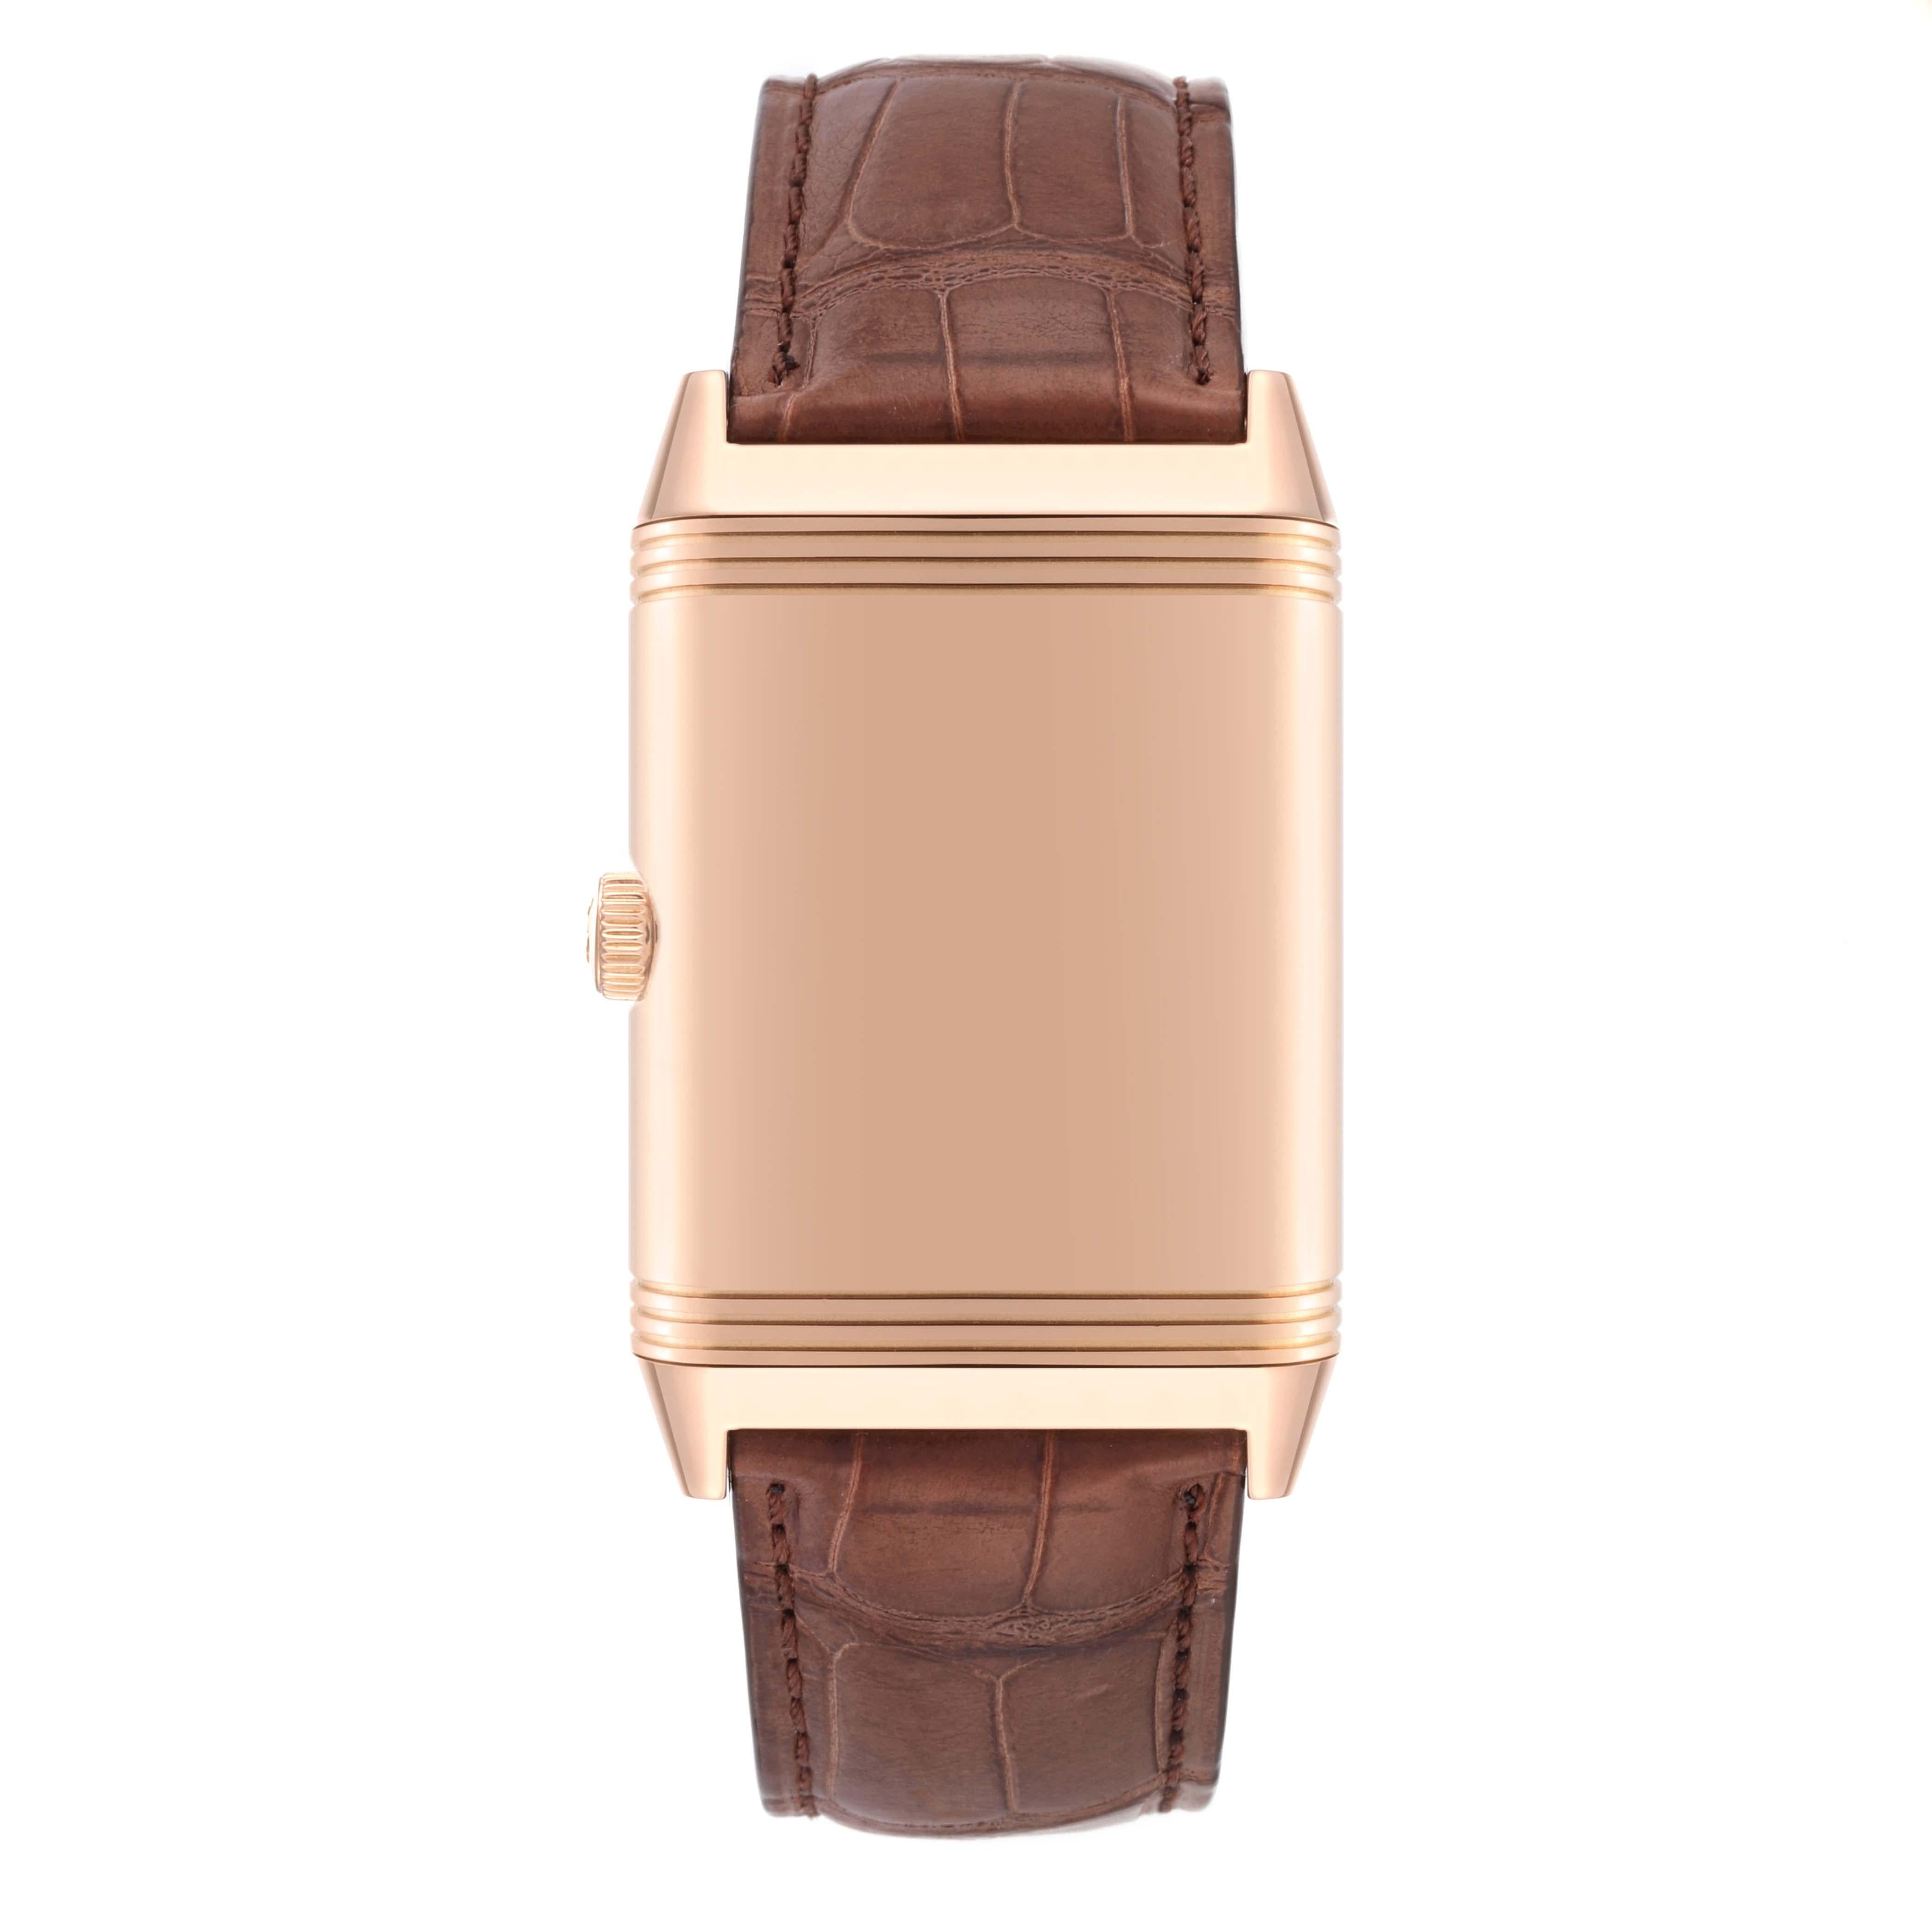 Jaeger LeCoultre Grande Reverso Email Rose Gold Mens Watch 273.2.62 Q3732523. Manual winding movement. Power reserve of approximately 45 hours. 18k rose gold rectangular rotating case 48.5 x 30 mm. Case flips over to reveal a blank solid caseback.